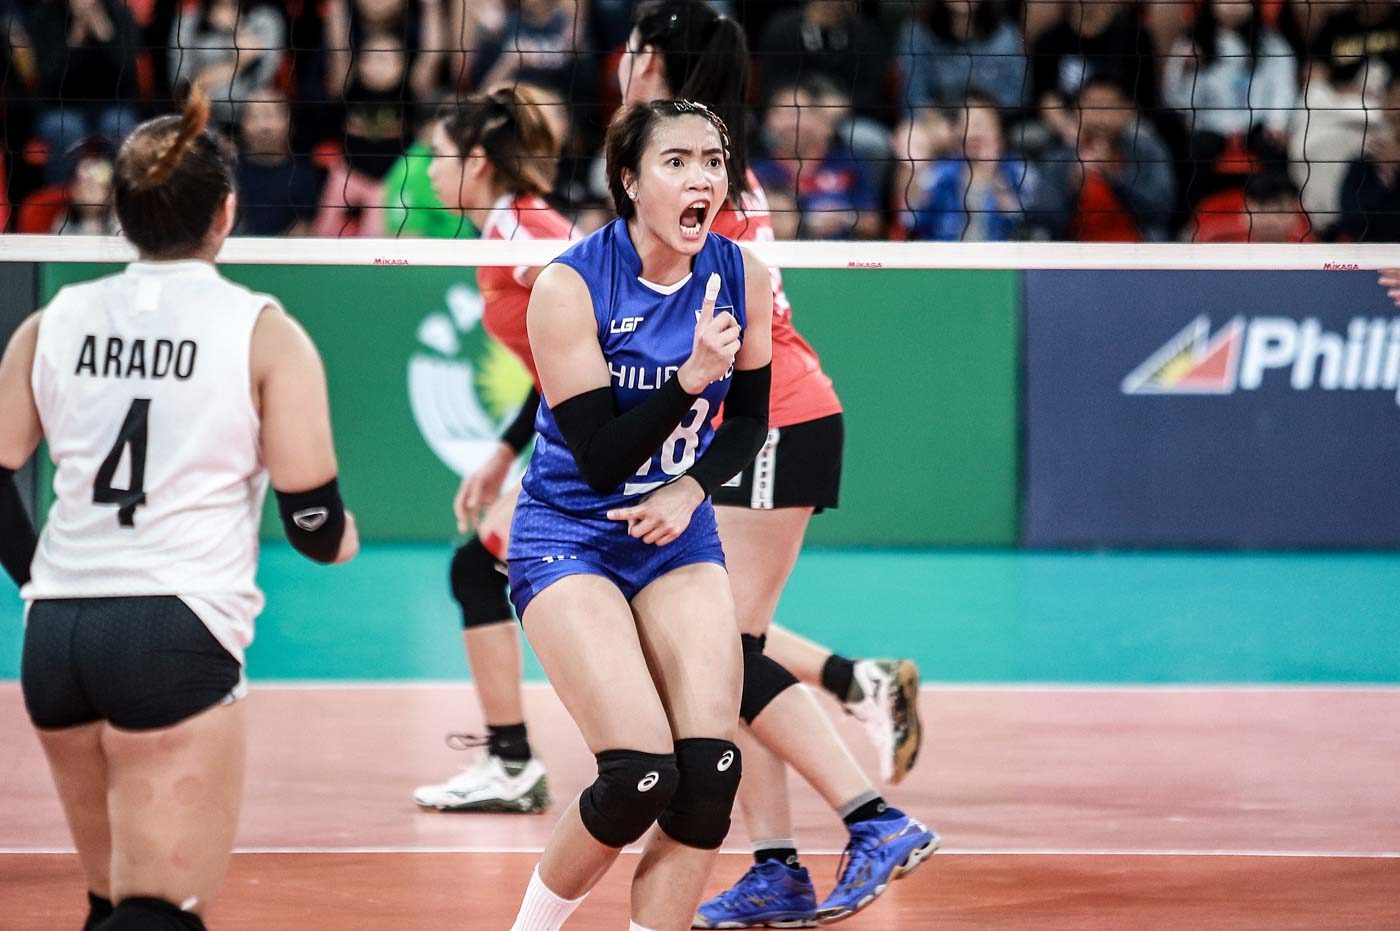 PH bows to Vietnam in SEA Games 2019 women’s volleyball debut